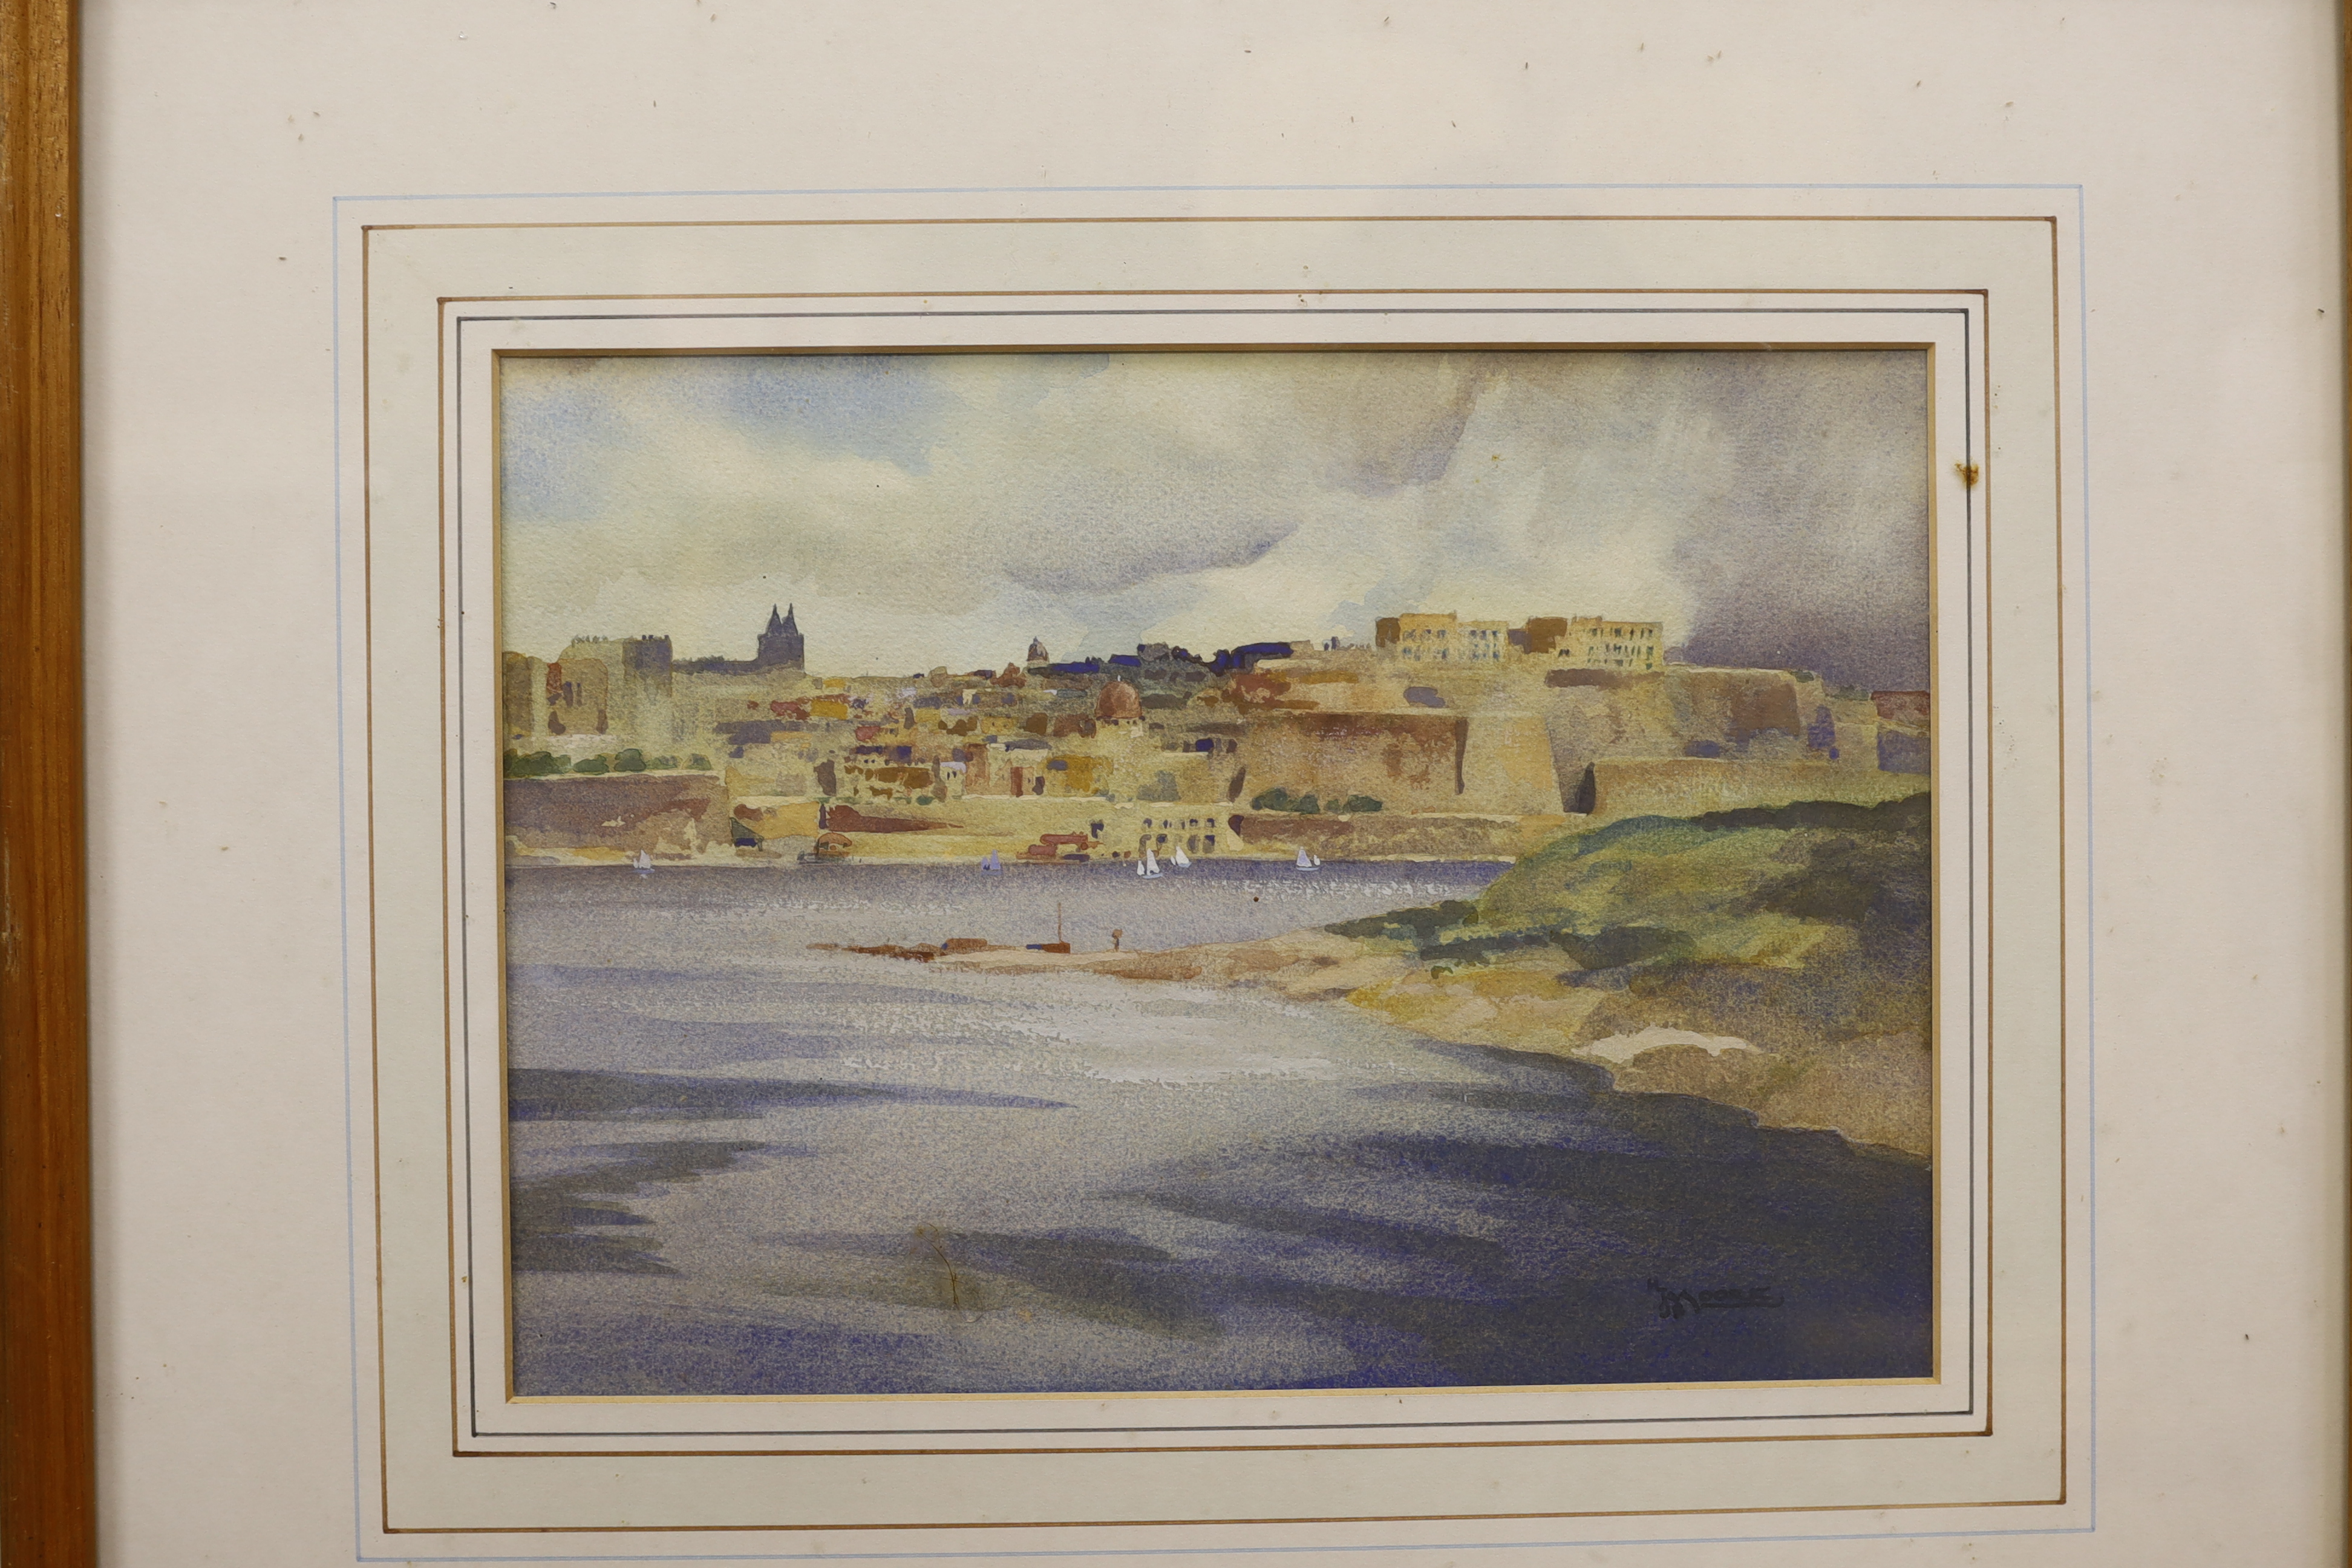 Rear Admiral Humfrey John Bradley Moore, CBE, RI (British, 1898-1985), four watercolours, Mediterranean views and study of a woman seated in a meadow, each signed, largest 26 x 35cm